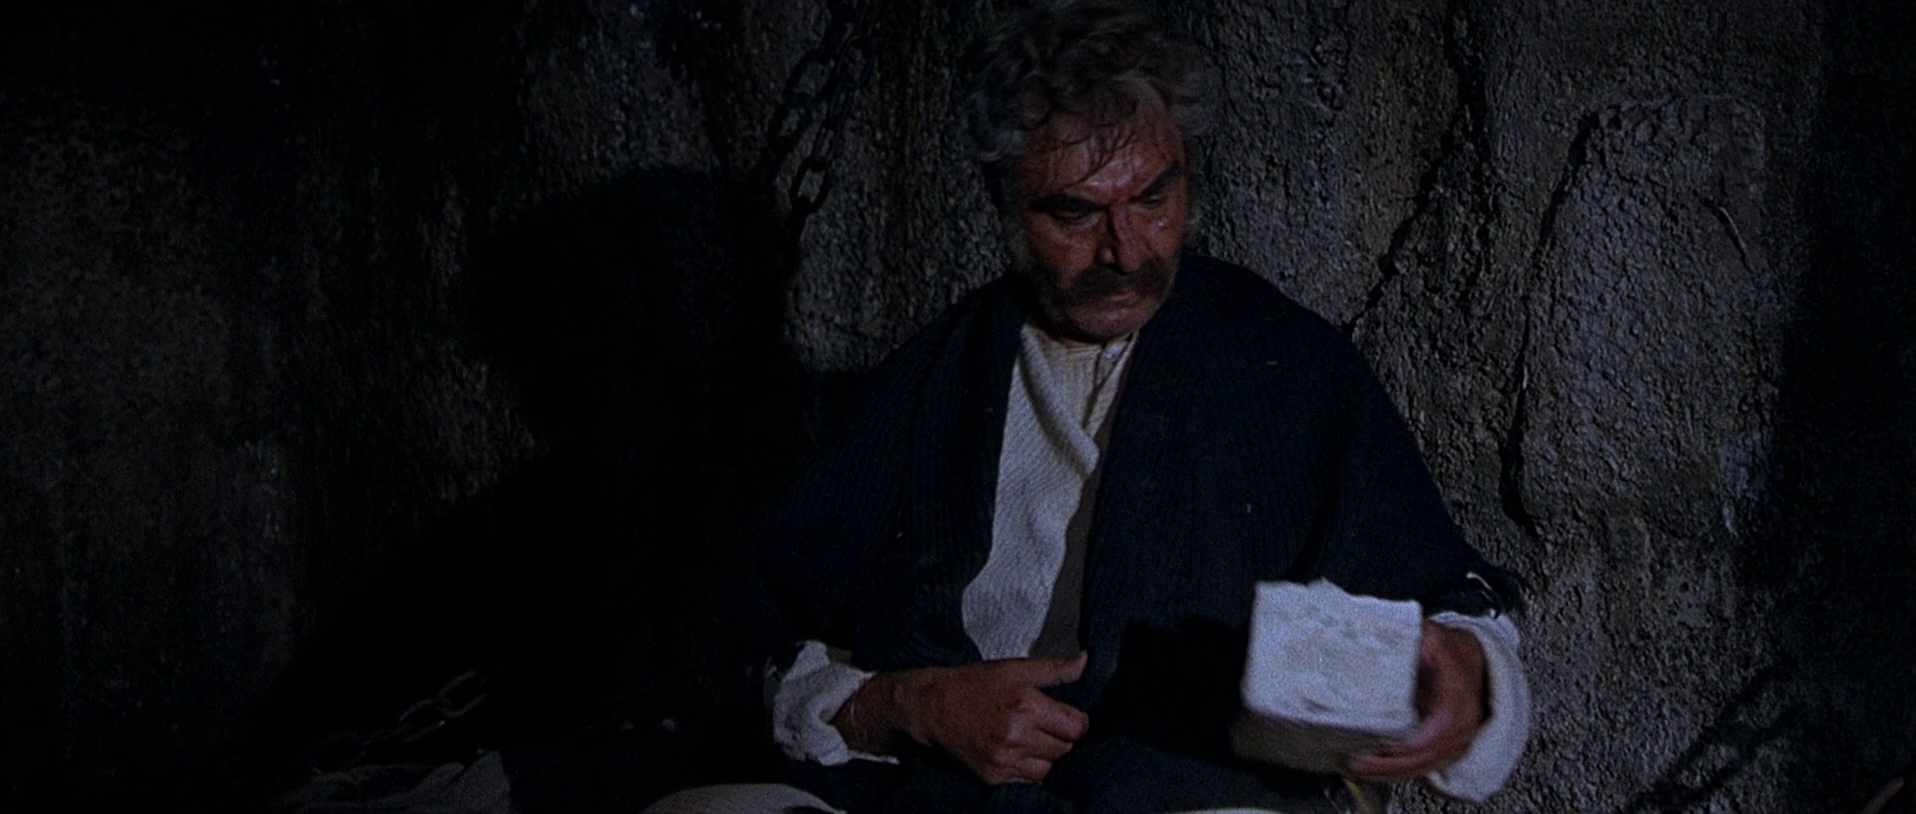 ƻ˫ڿ For.a.Few.Dollars.More.1965.1080p.BluRay.x264.DD5.1-FGT 20.14GB-5.png